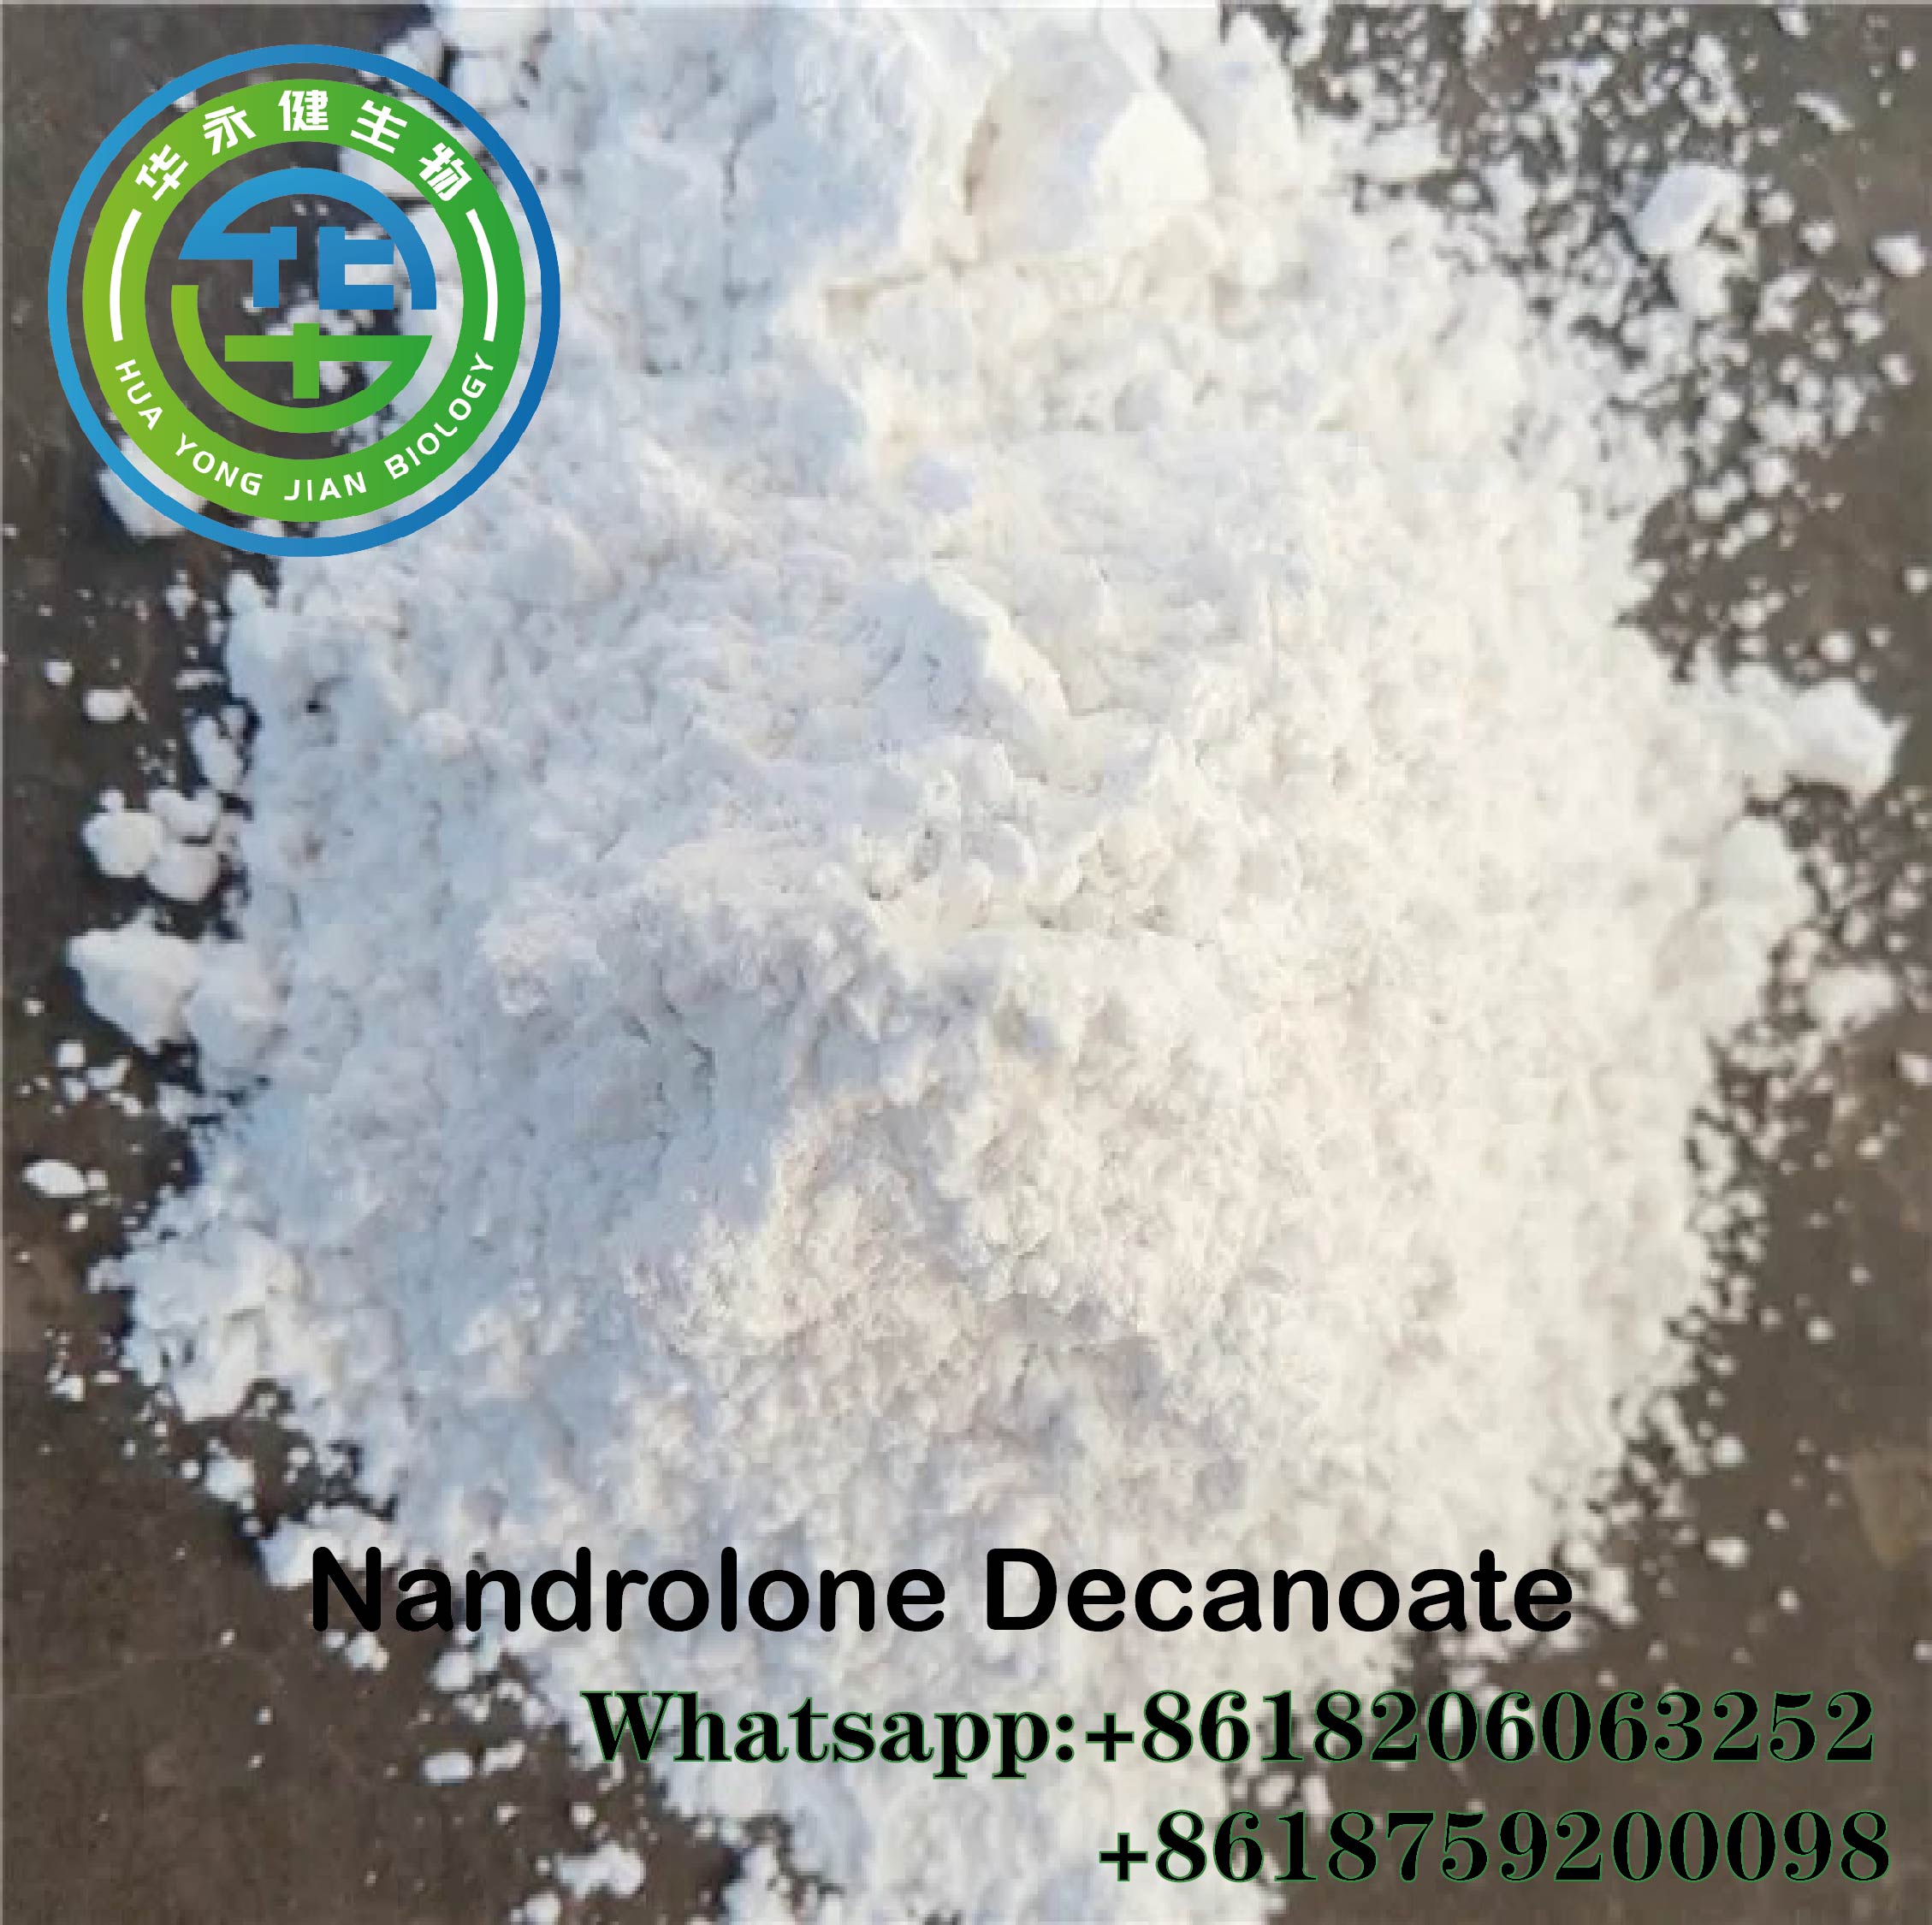 Pharmaceutical Hormone Nandrolone Decanoat Raw Material Raw Powder Deca Durabolin Steroid White Powder Fitness Weight Loss